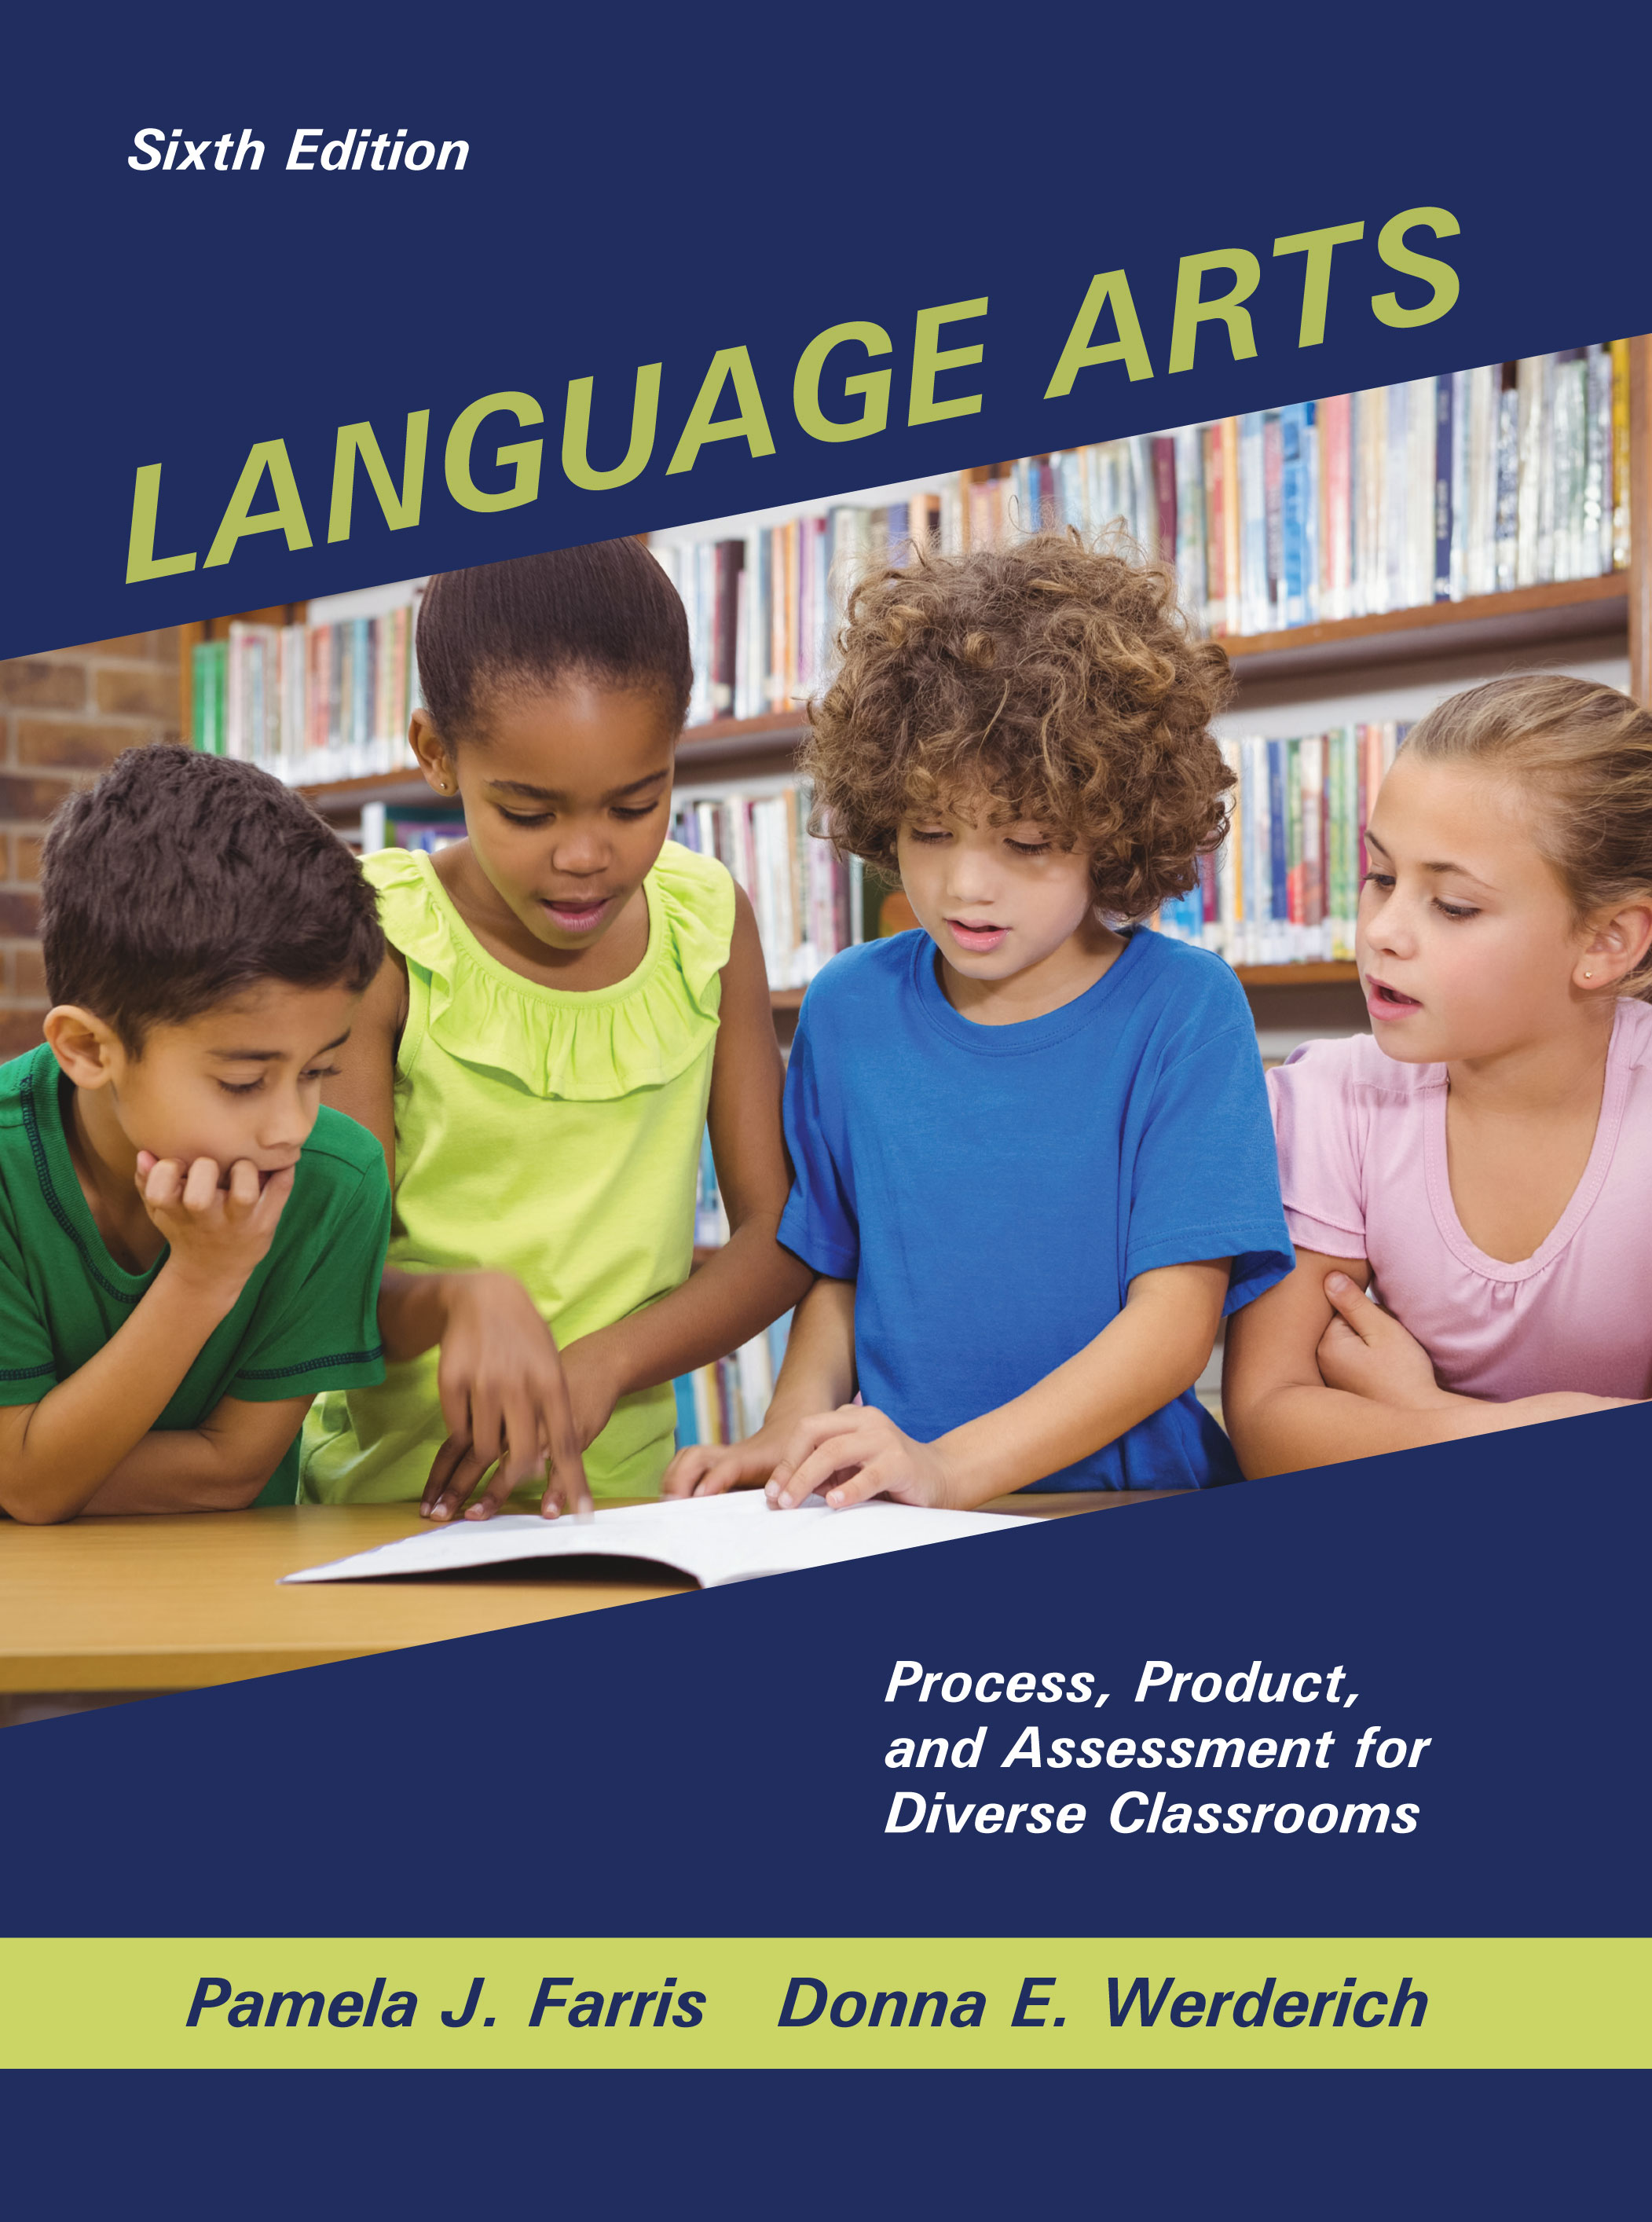 Language Arts: Process, Product, and Assessment for Diverse Classrooms, Sixth Edition by Pamela J. Farris, Donna E. Werderich